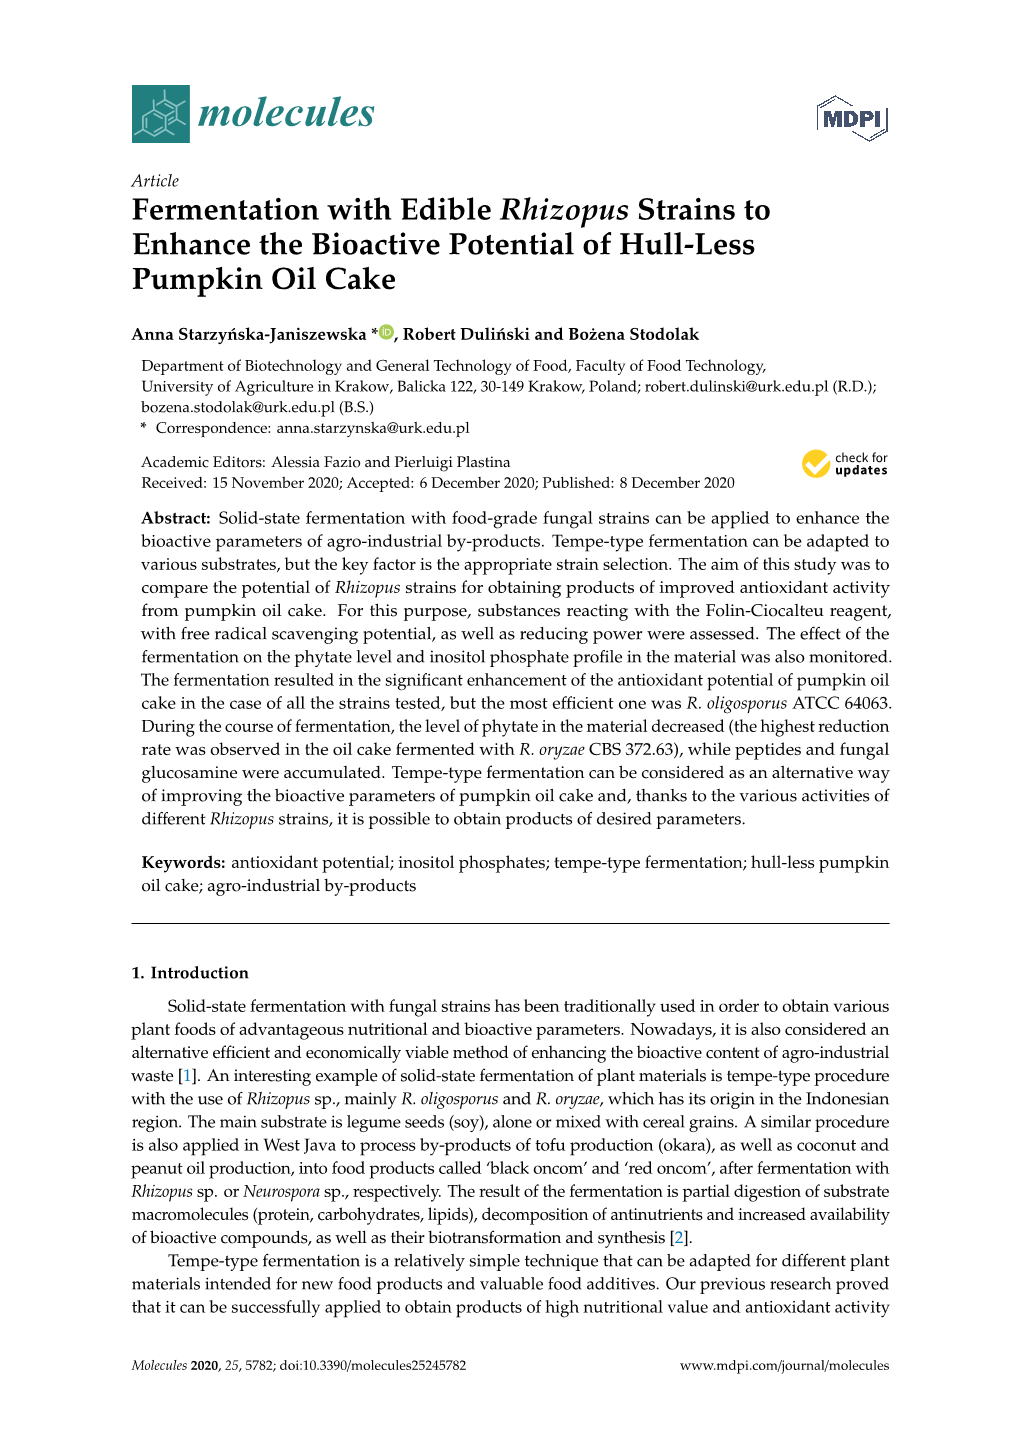 Fermentation with Edible Rhizopus Strains to Enhance the Bioactive Potential of Hull-Less Pumpkin Oil Cake